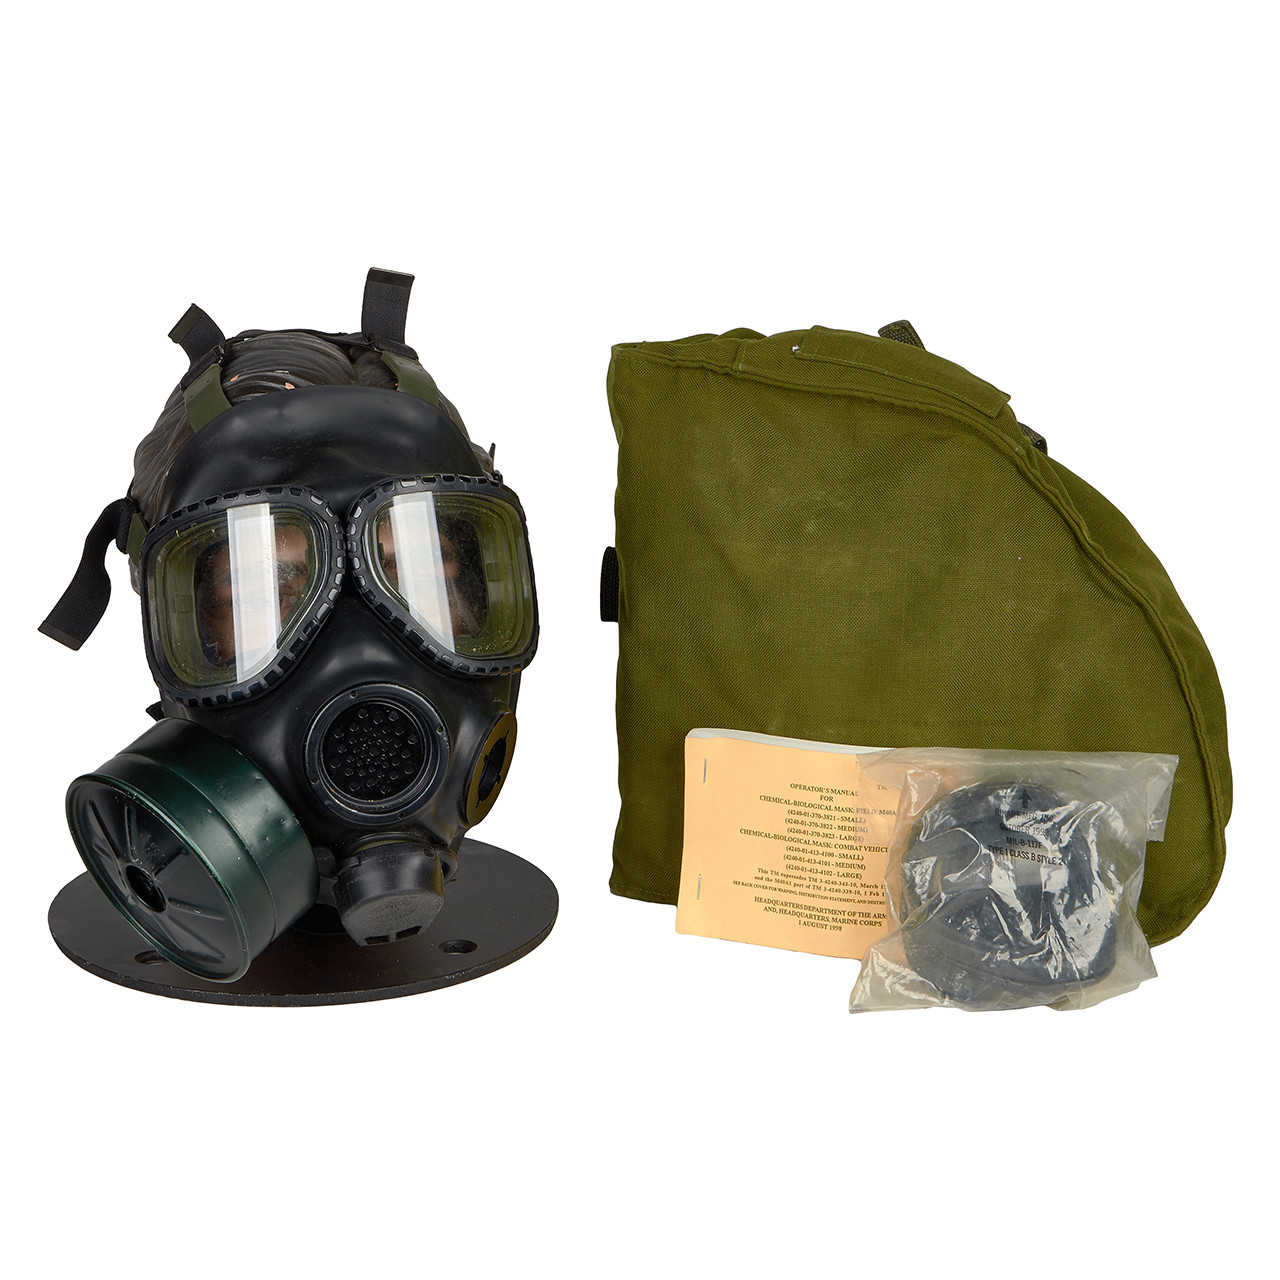 GM45 M40 SERIES G.I. ISSUE GAS MASK